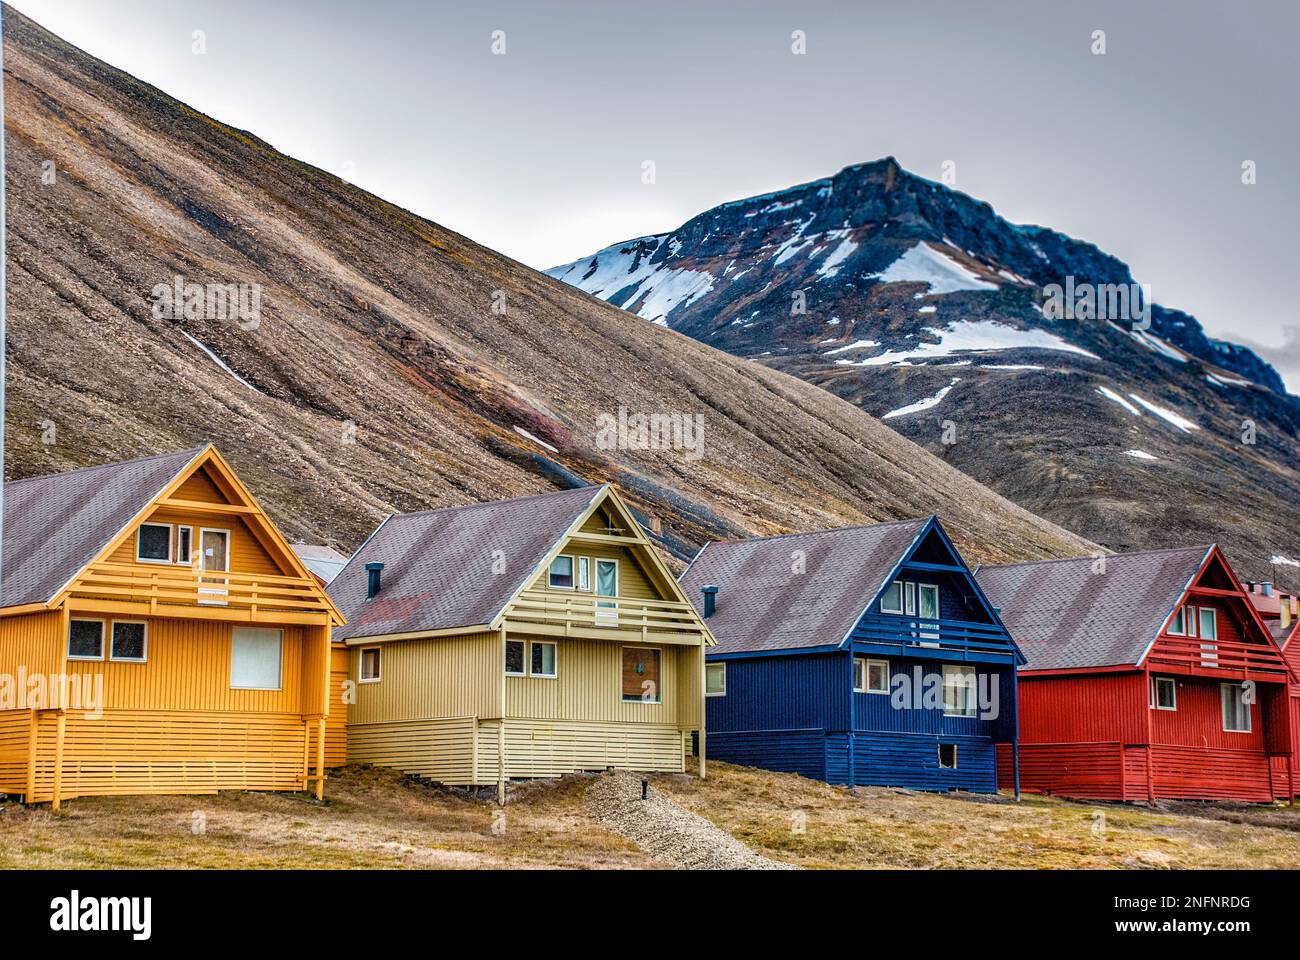 Colorful houses in the town of Longyearbyen on Spitsbergen, Svalbard Archipelago, Norway Stock Photo